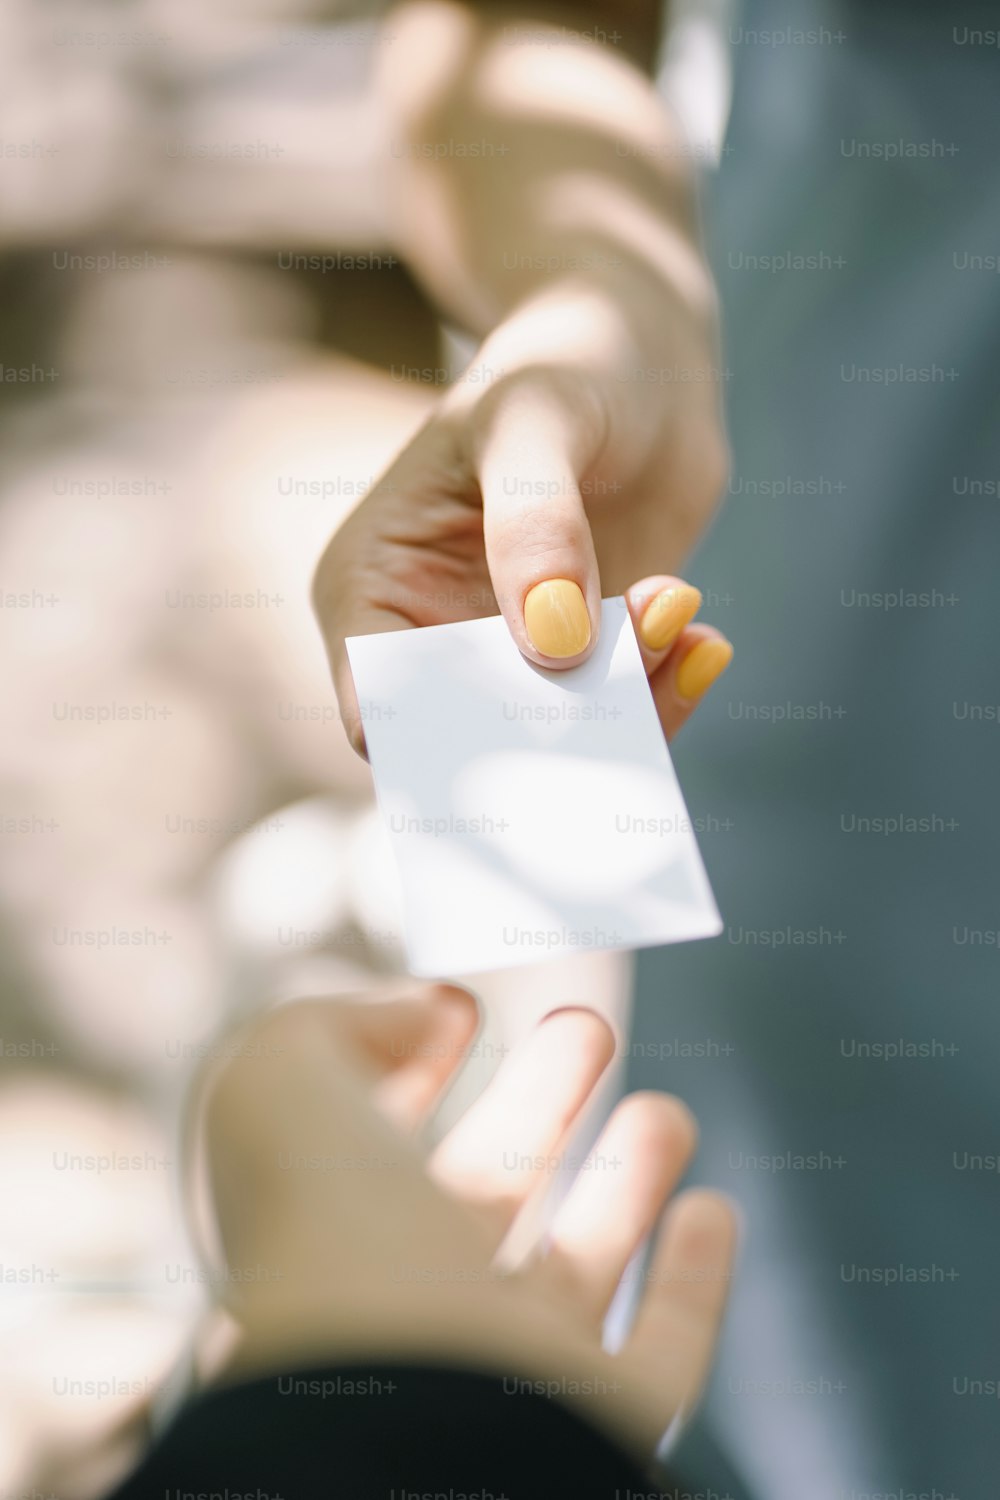 a person holding a piece of paper in their hand